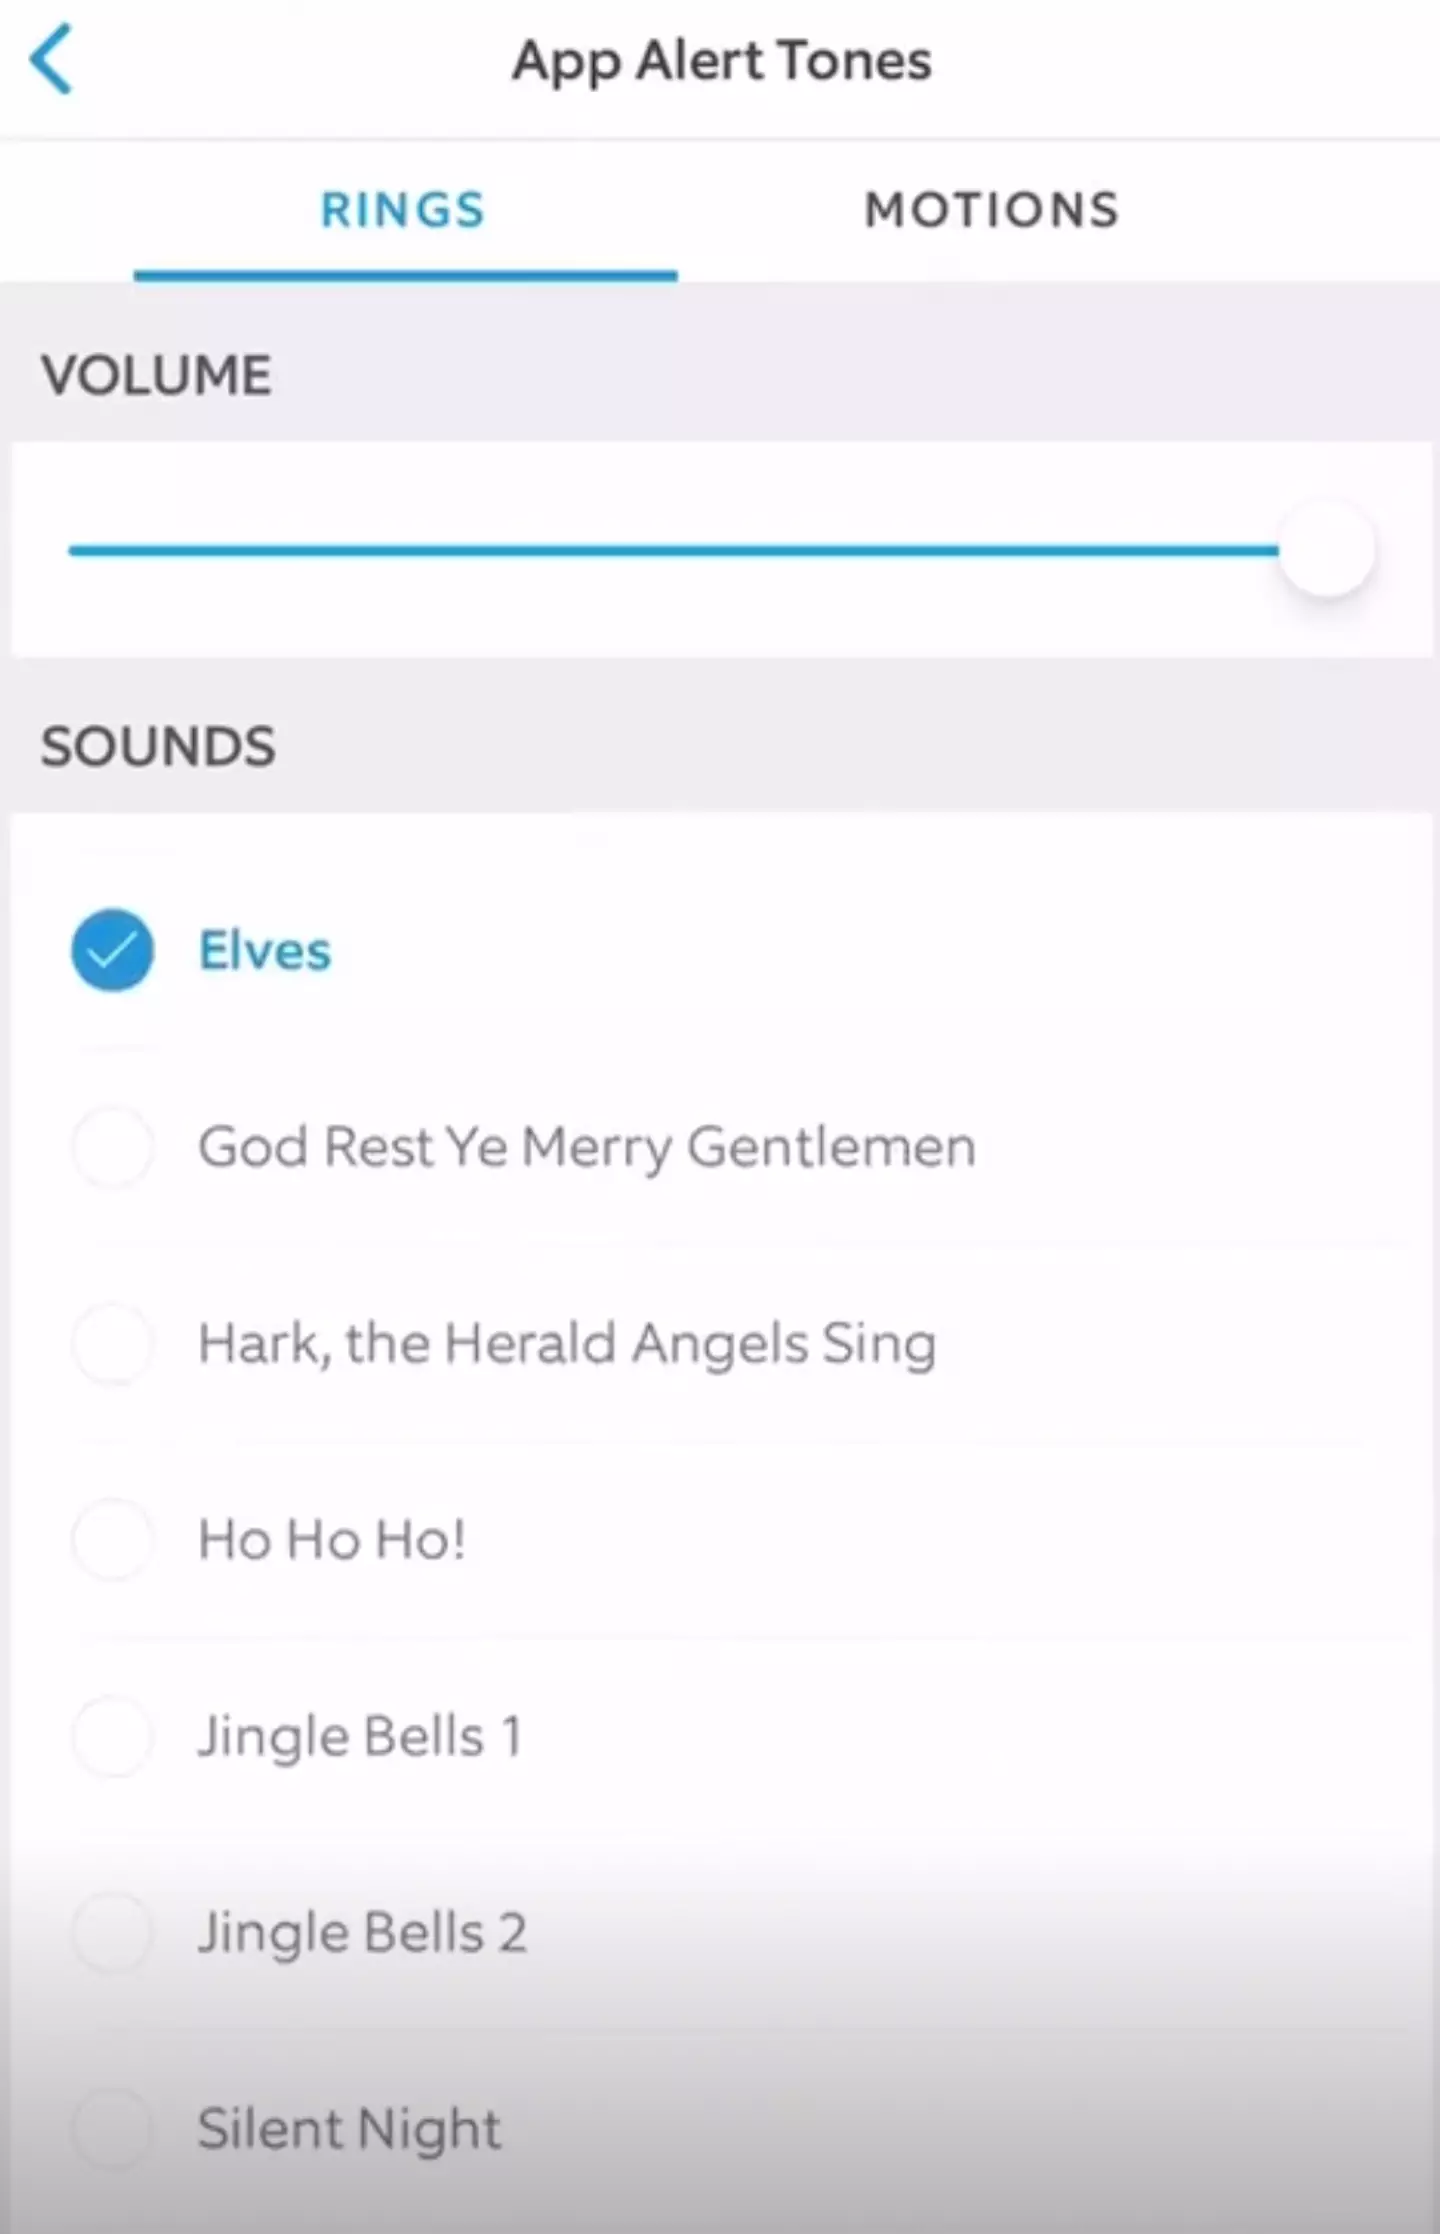 There's an array of Christmassy sounds to choose from.